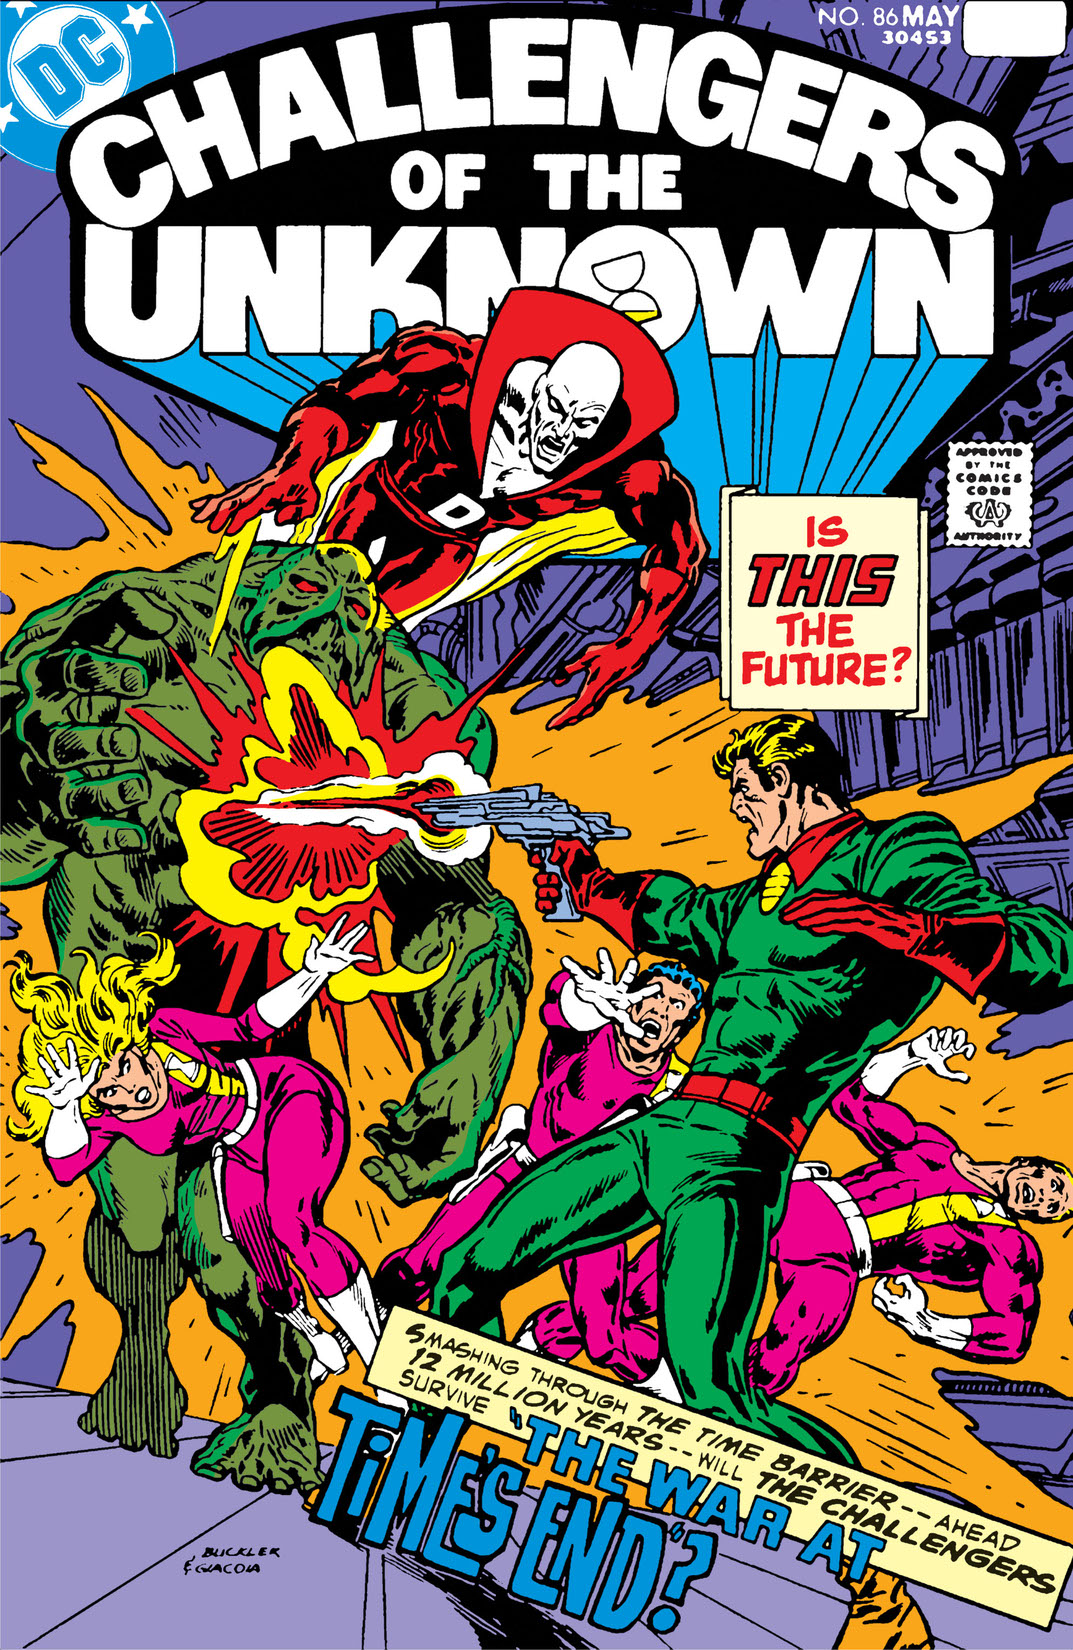 Challengers of the Unknown (1958-) #86 preview images